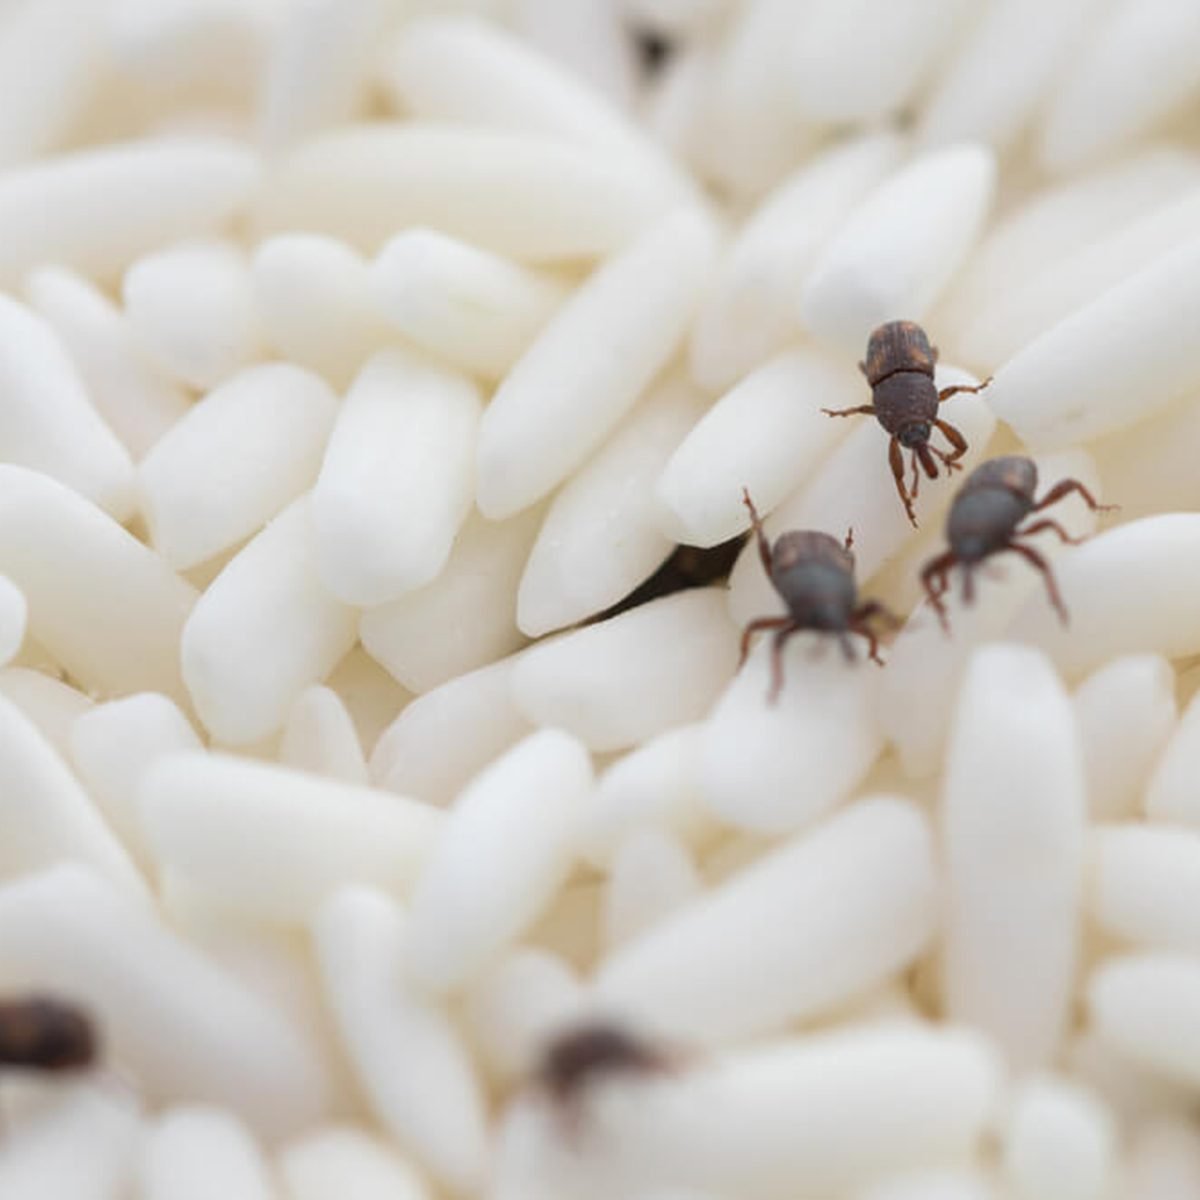 How To Get Rid of Pantry Pests